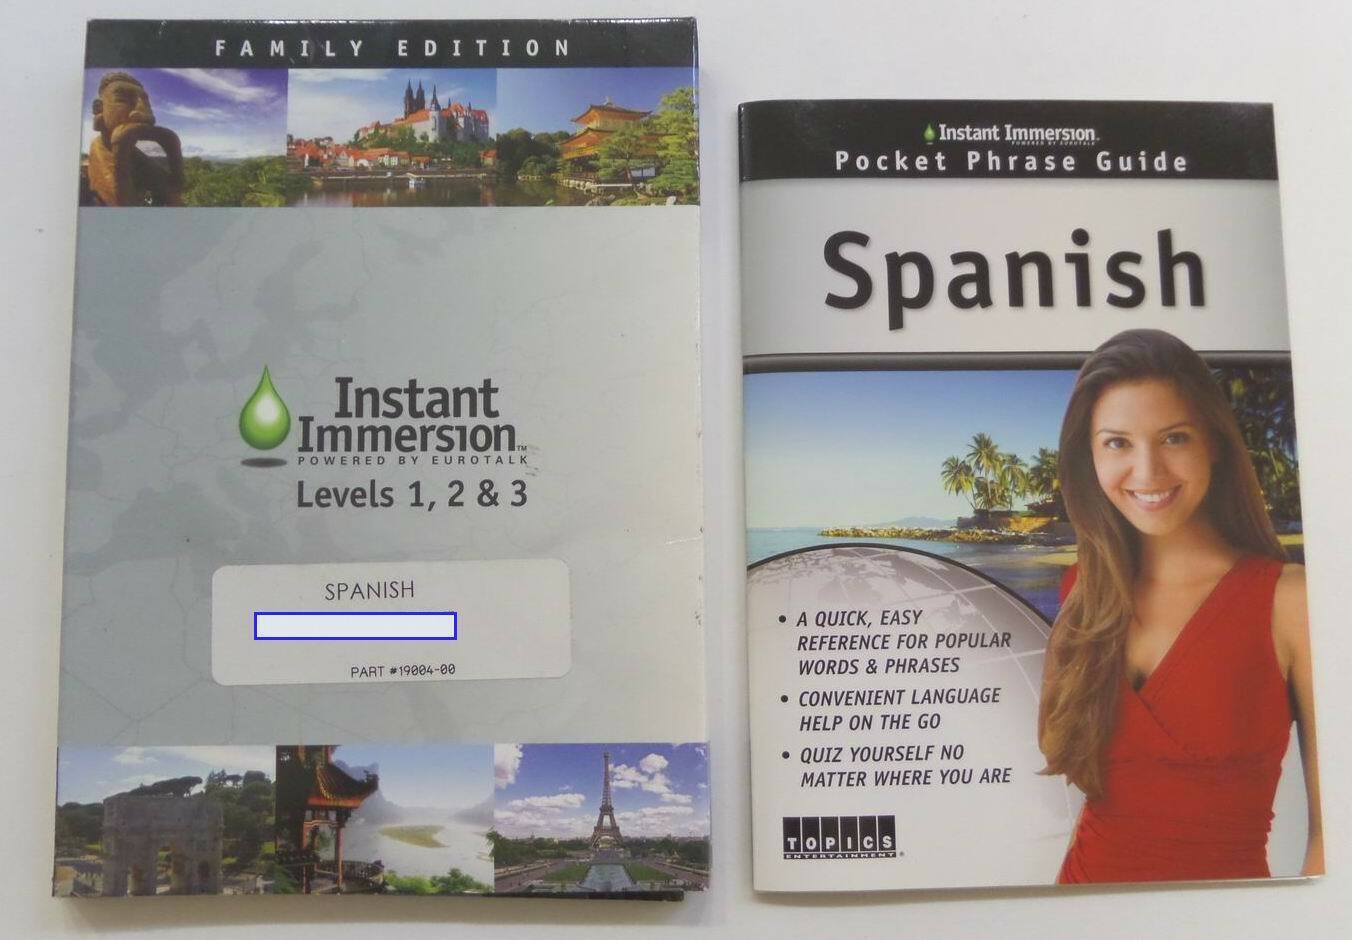 Instant Immersion Spanish Levels 1, 2, & 3 Family Edition w/ Pocket Phrase Guide